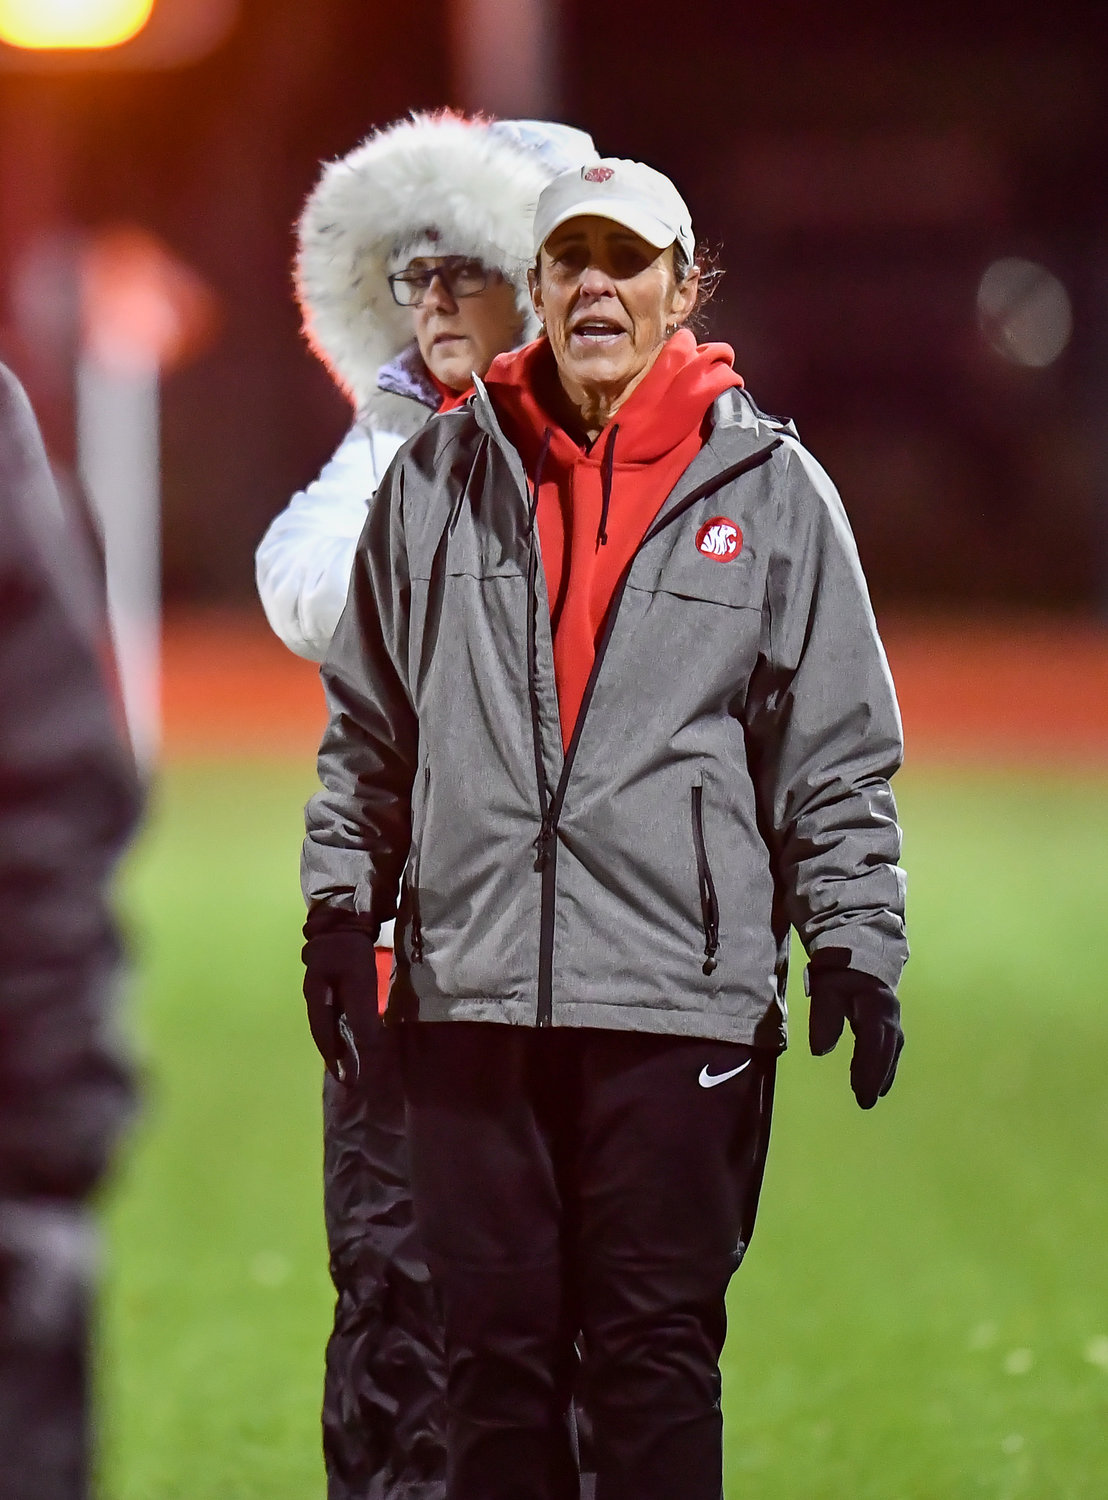 March 8,, 2022: Katy's head coach Dianne Loftin looks on at her lady Tigers during their soccer match against Katy Taylor. (Photo by Mark Goodman / Katy Times)